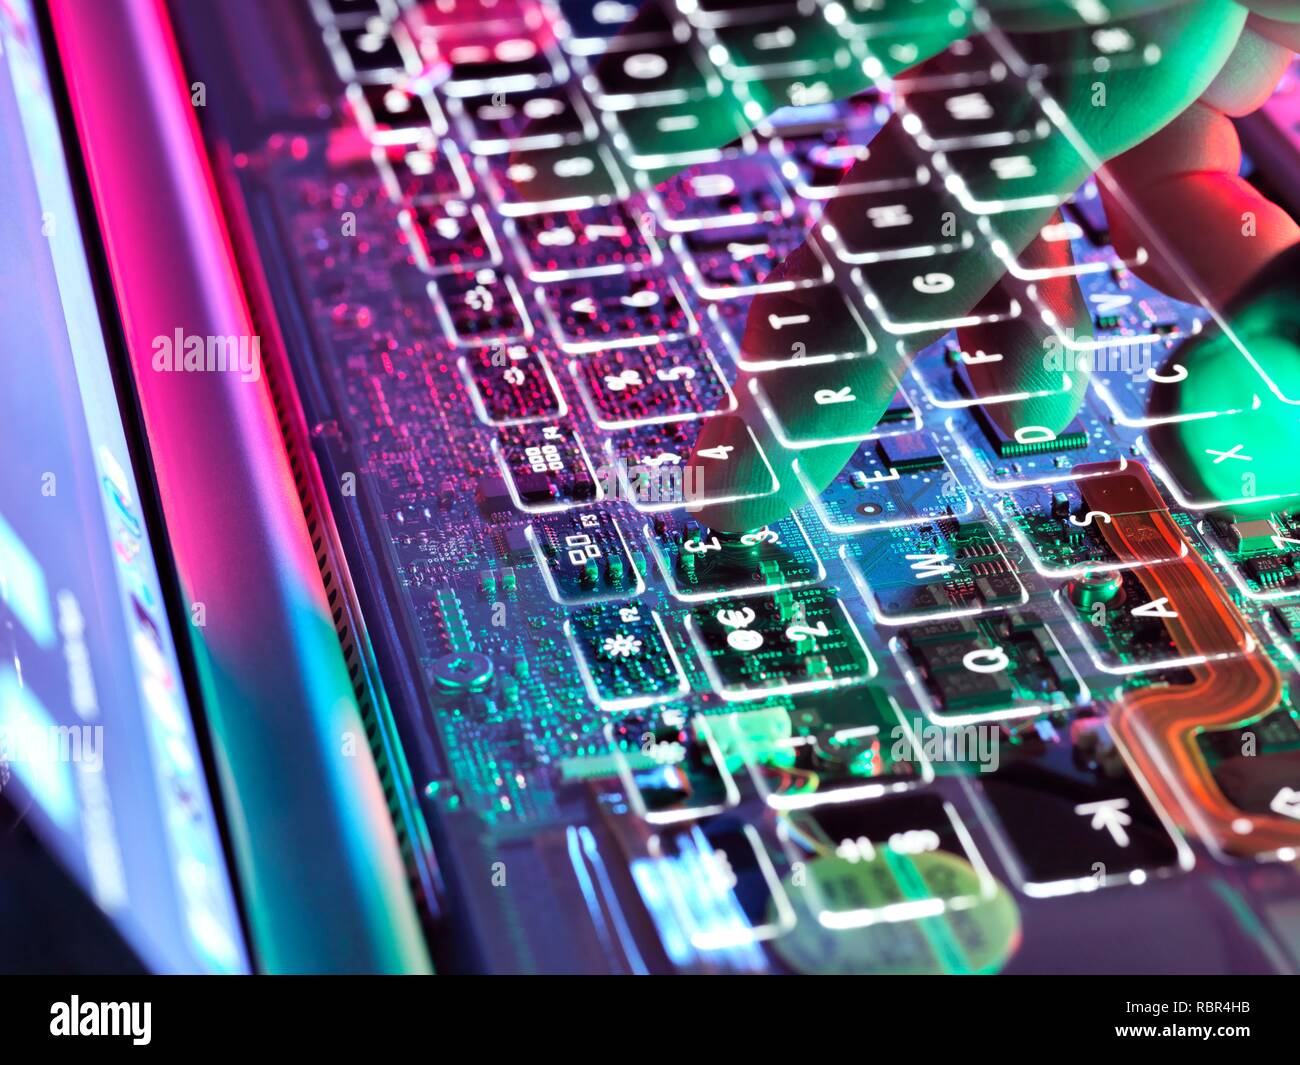 Double exposure of a man typing at a laptop computer keyboard exposing the electronics underneath. Stock Photo